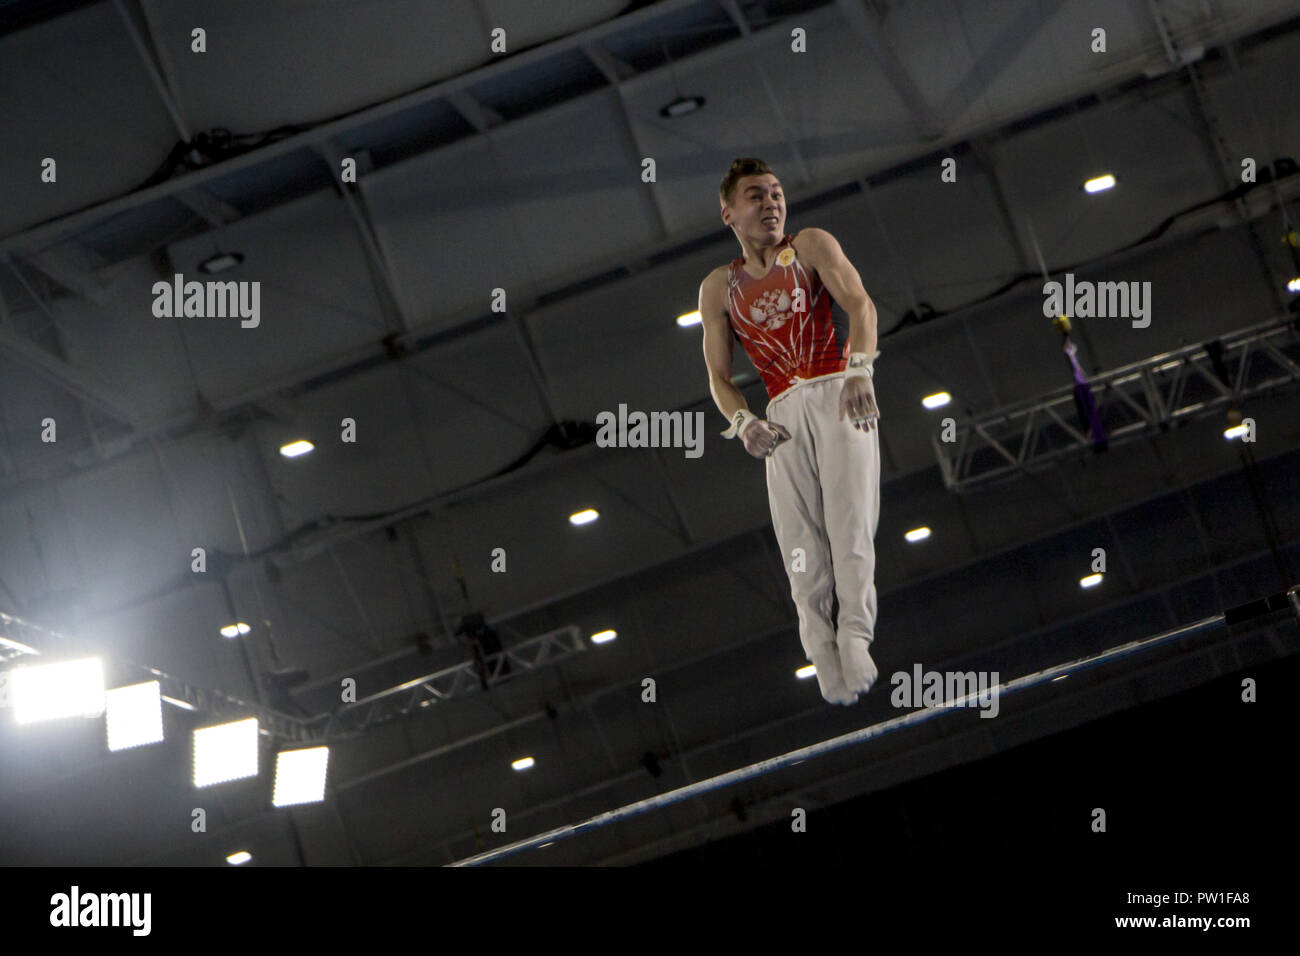 Buenos Aires, Buenos Aires, Argentina. 11th Oct, 2018. The Russian Naidin Sergei was the winner of the Silver Medal in the Multiple Masculine Artistic Gymnastics Competition at the 2018 Buenos Aires Youth Olympic Games. Credit: Roberto Almeida Aveledo/ZUMA Wire/Alamy Live News Stock Photo